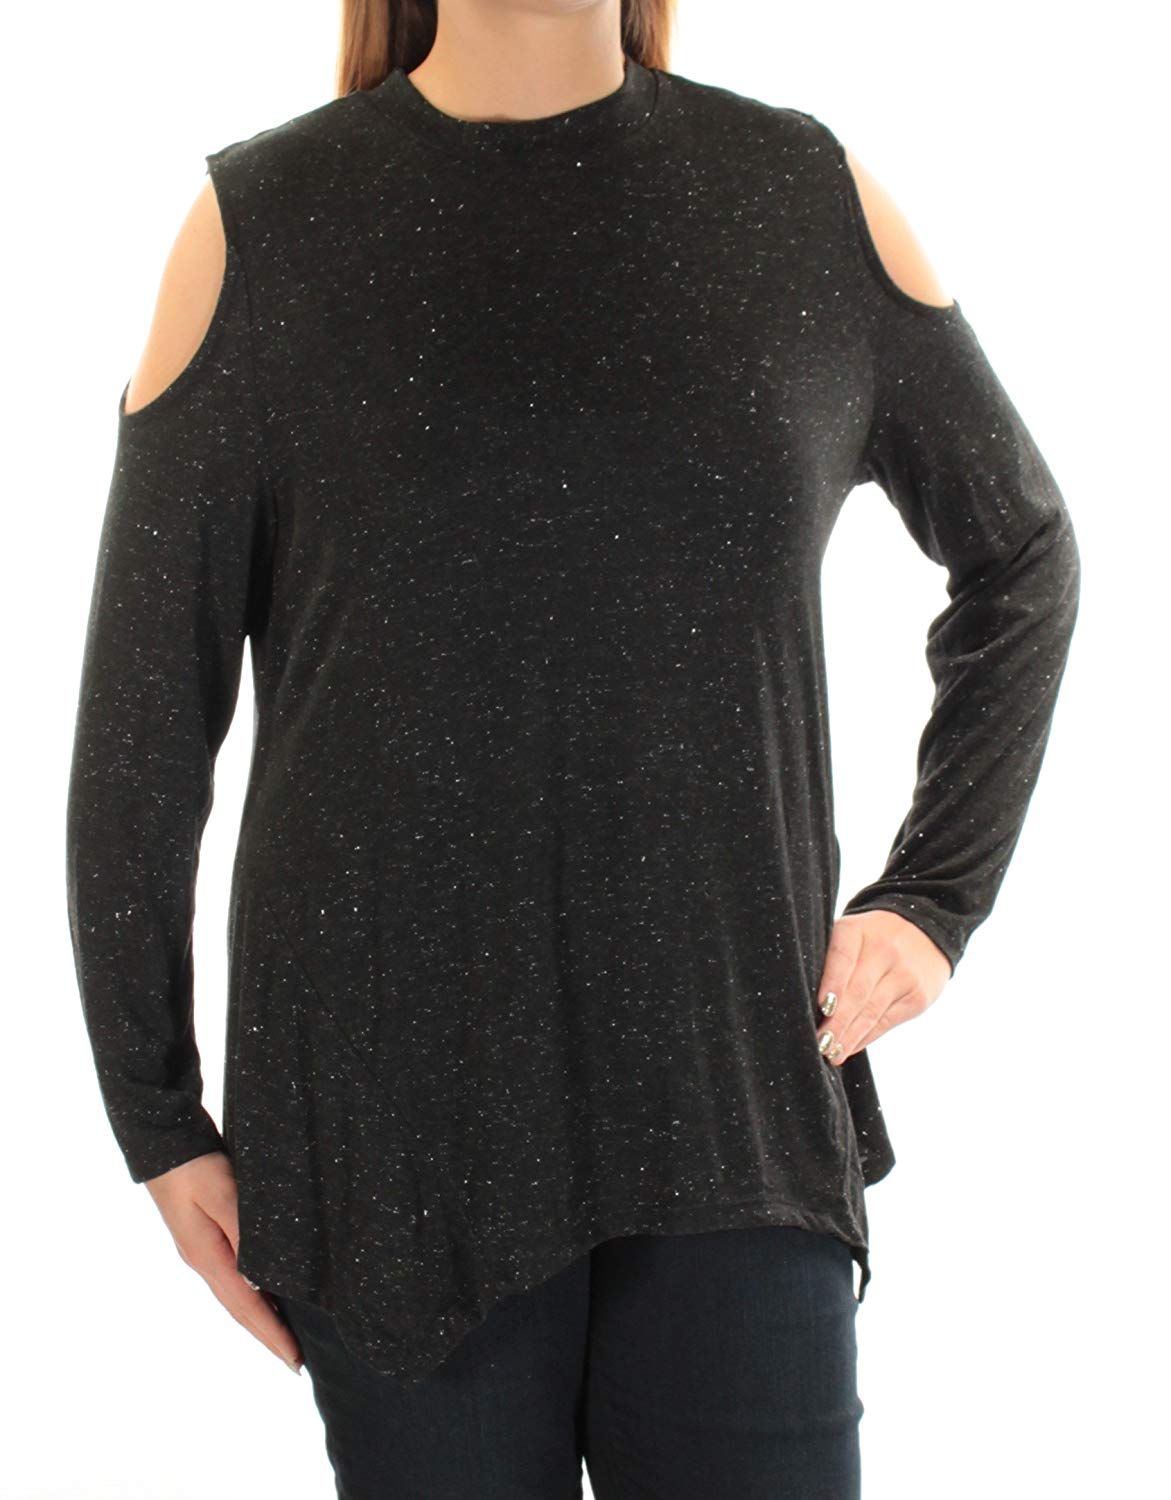 Style & Co. Womens Jersey Asymmetrical Cold Shoulder Pullover Top (Black, Large)